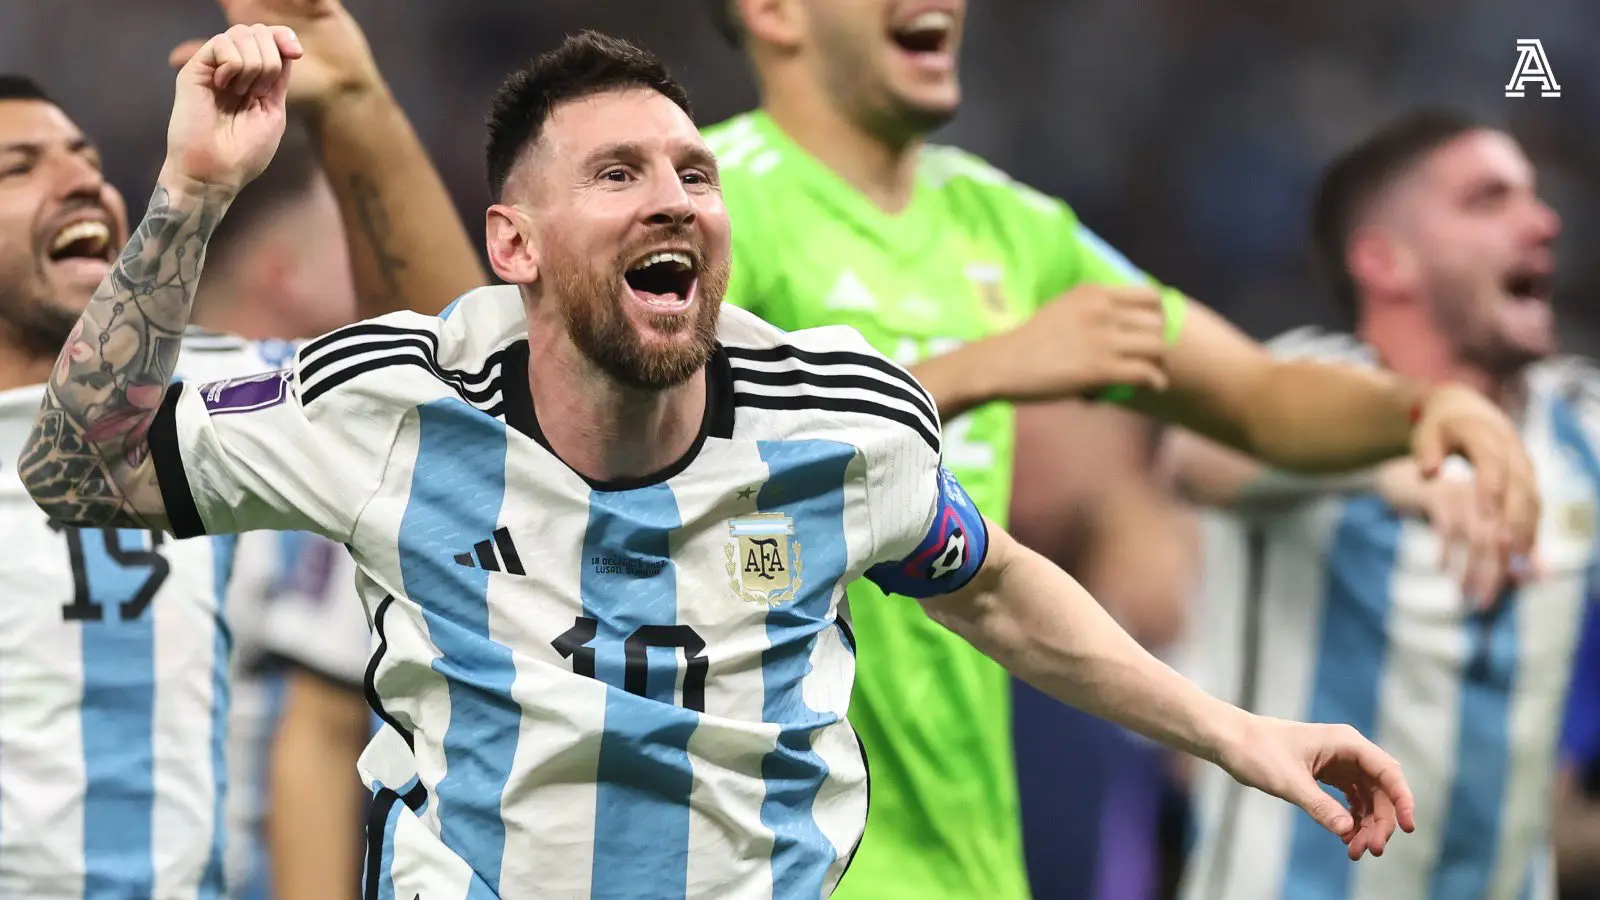 Argentina beat France on penalties after thrilling World Cup final ends in 3-3 draw